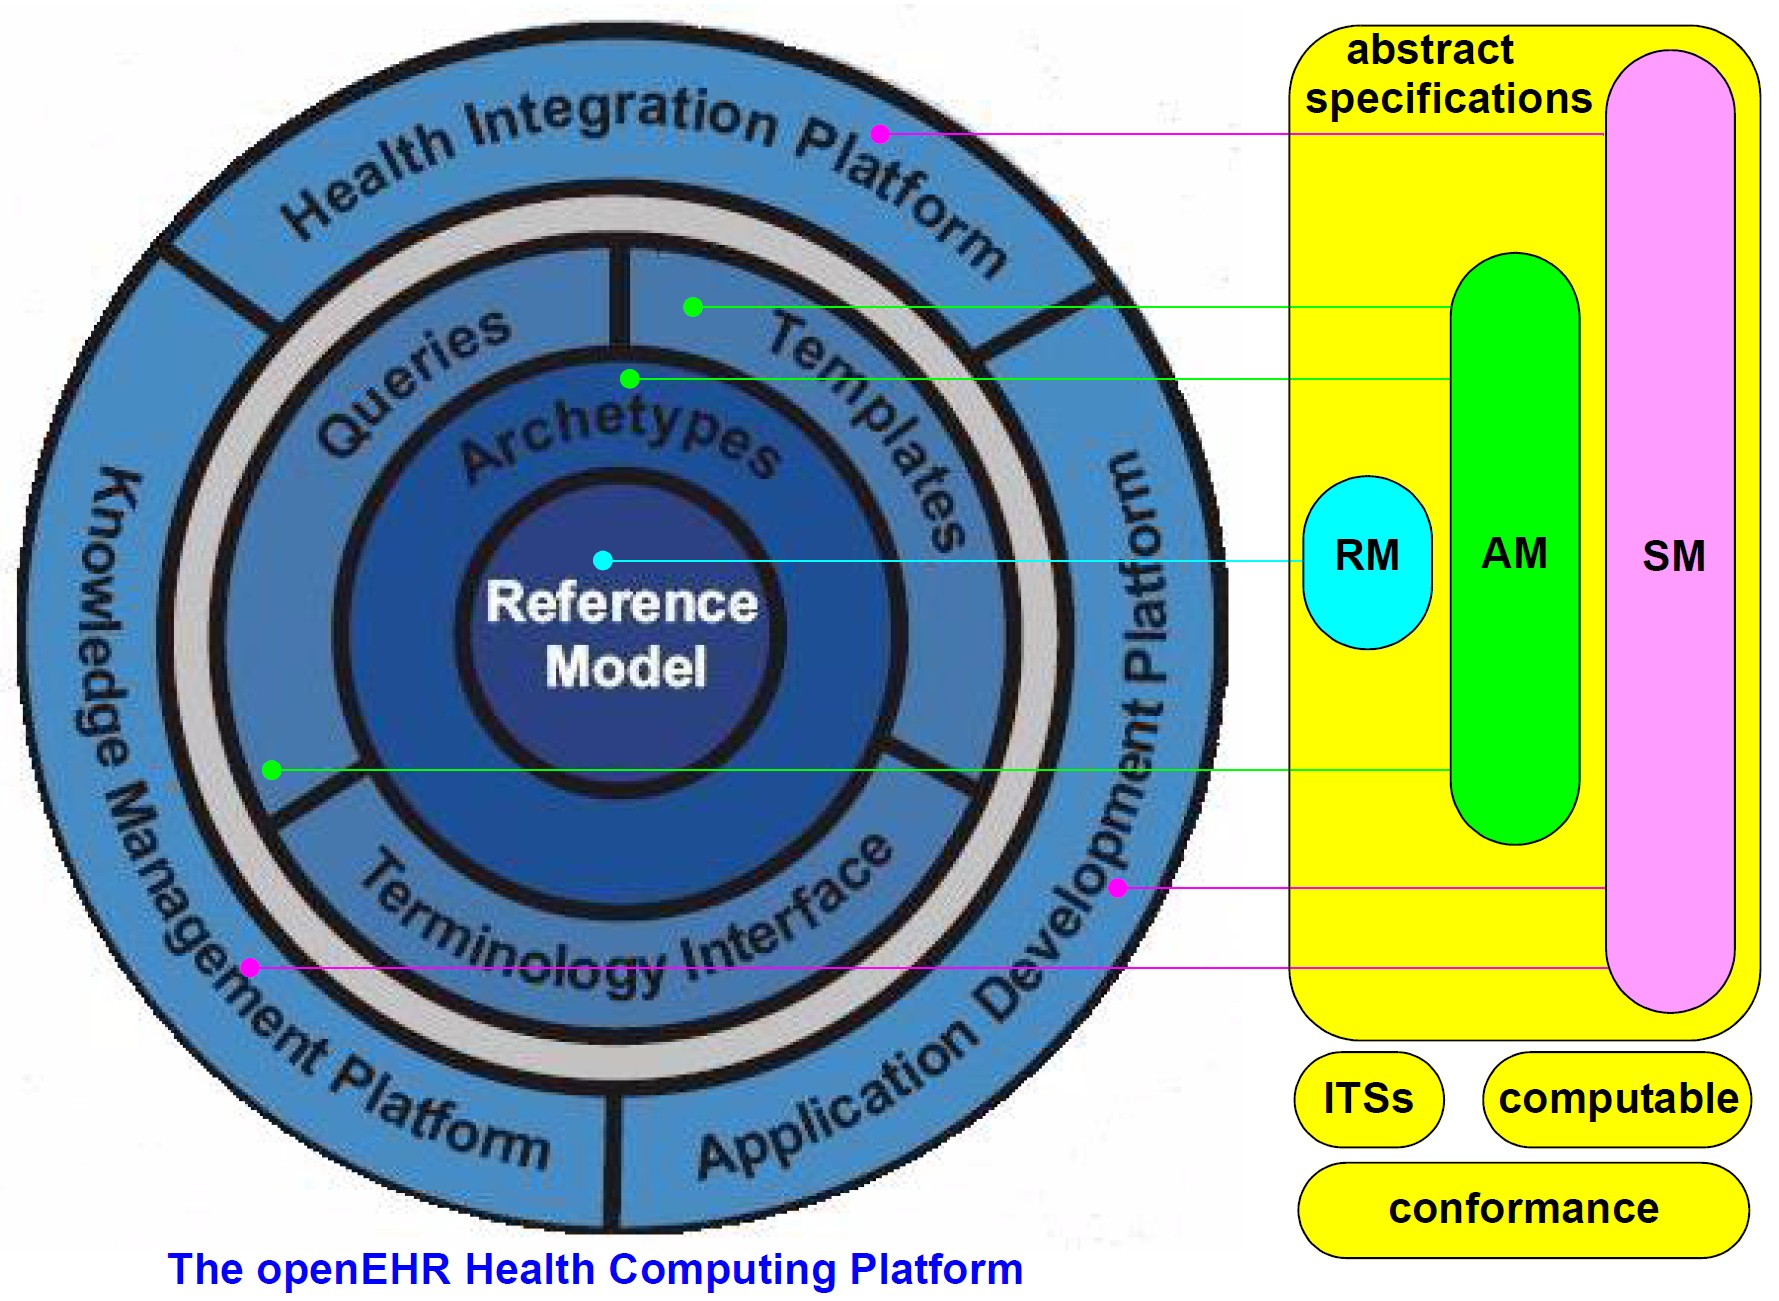 Overview of openEHR project specification